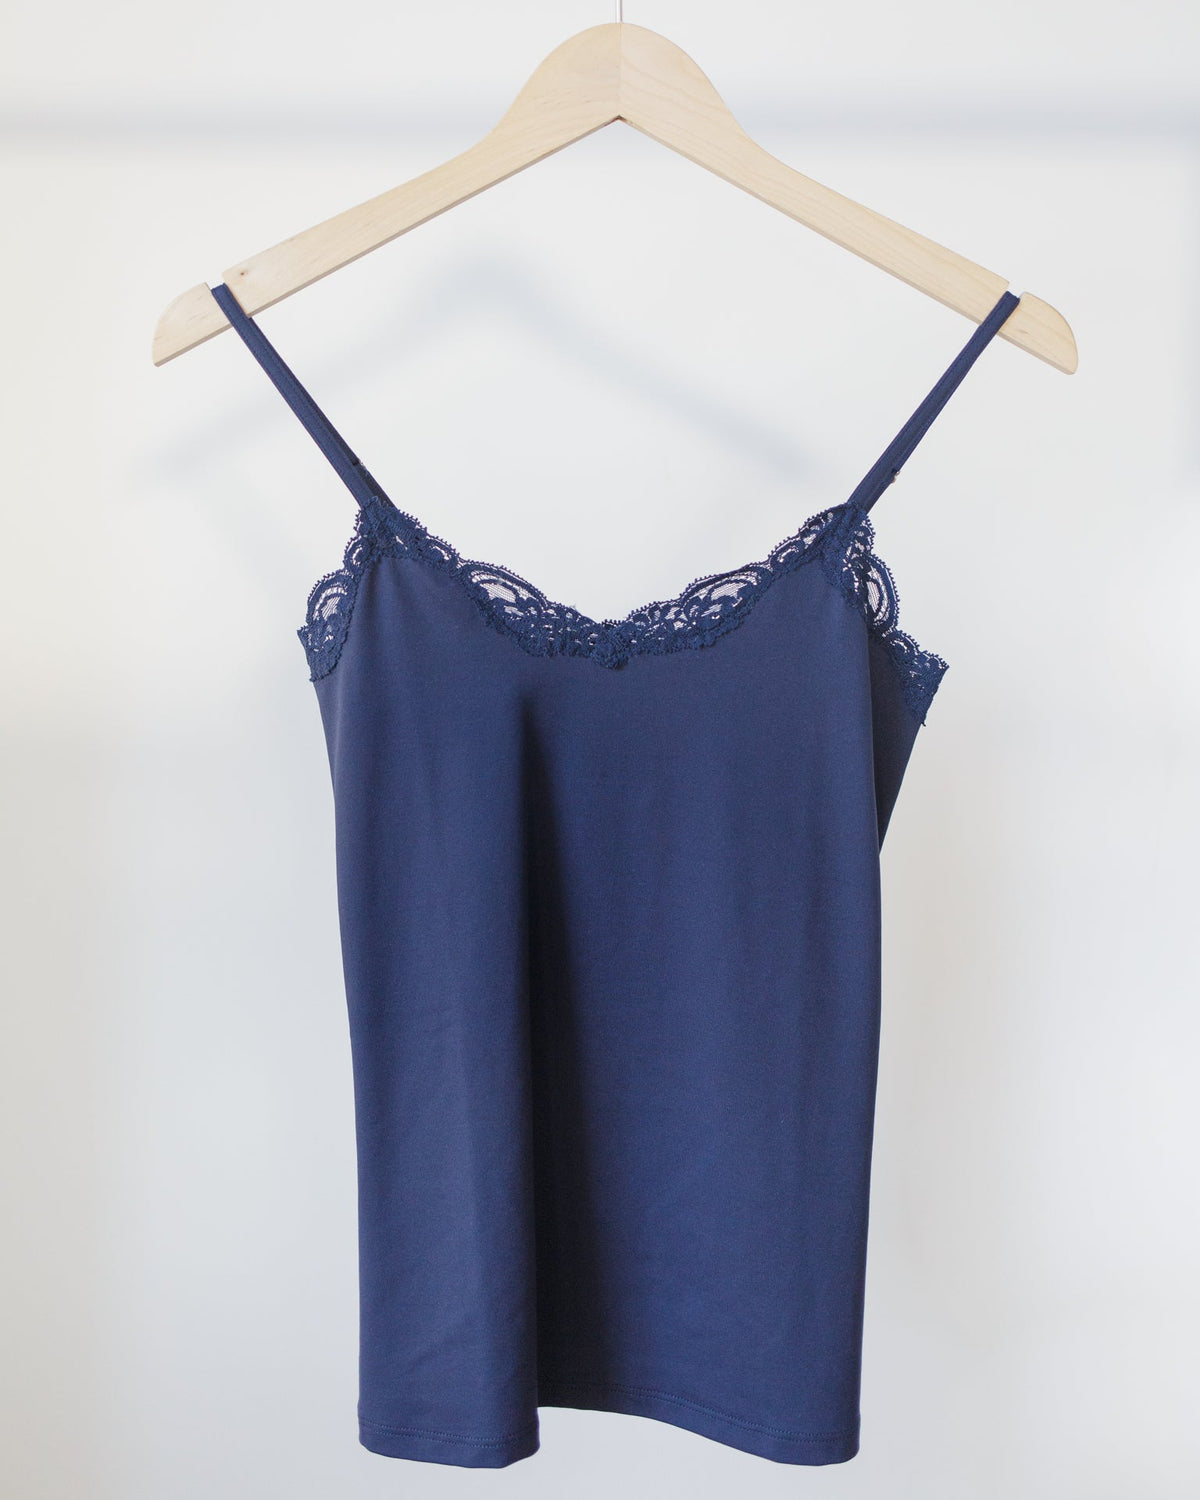 Only Hearts Clothing Del w/ Lace V Cami in Navy